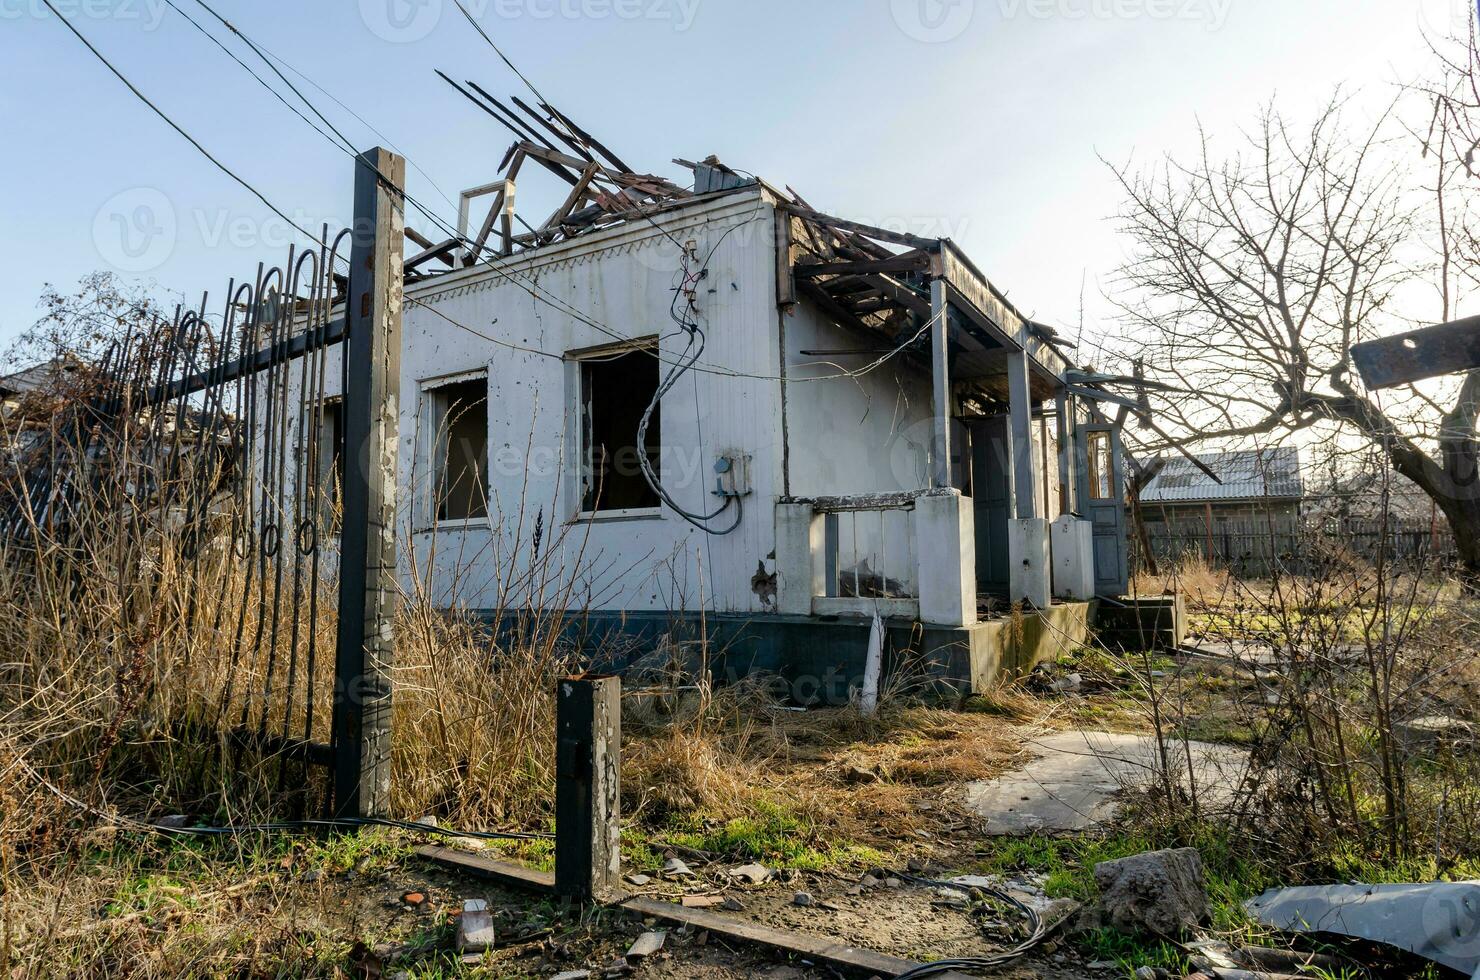 destroyed and burned houses in the city Russia Ukraine war photo